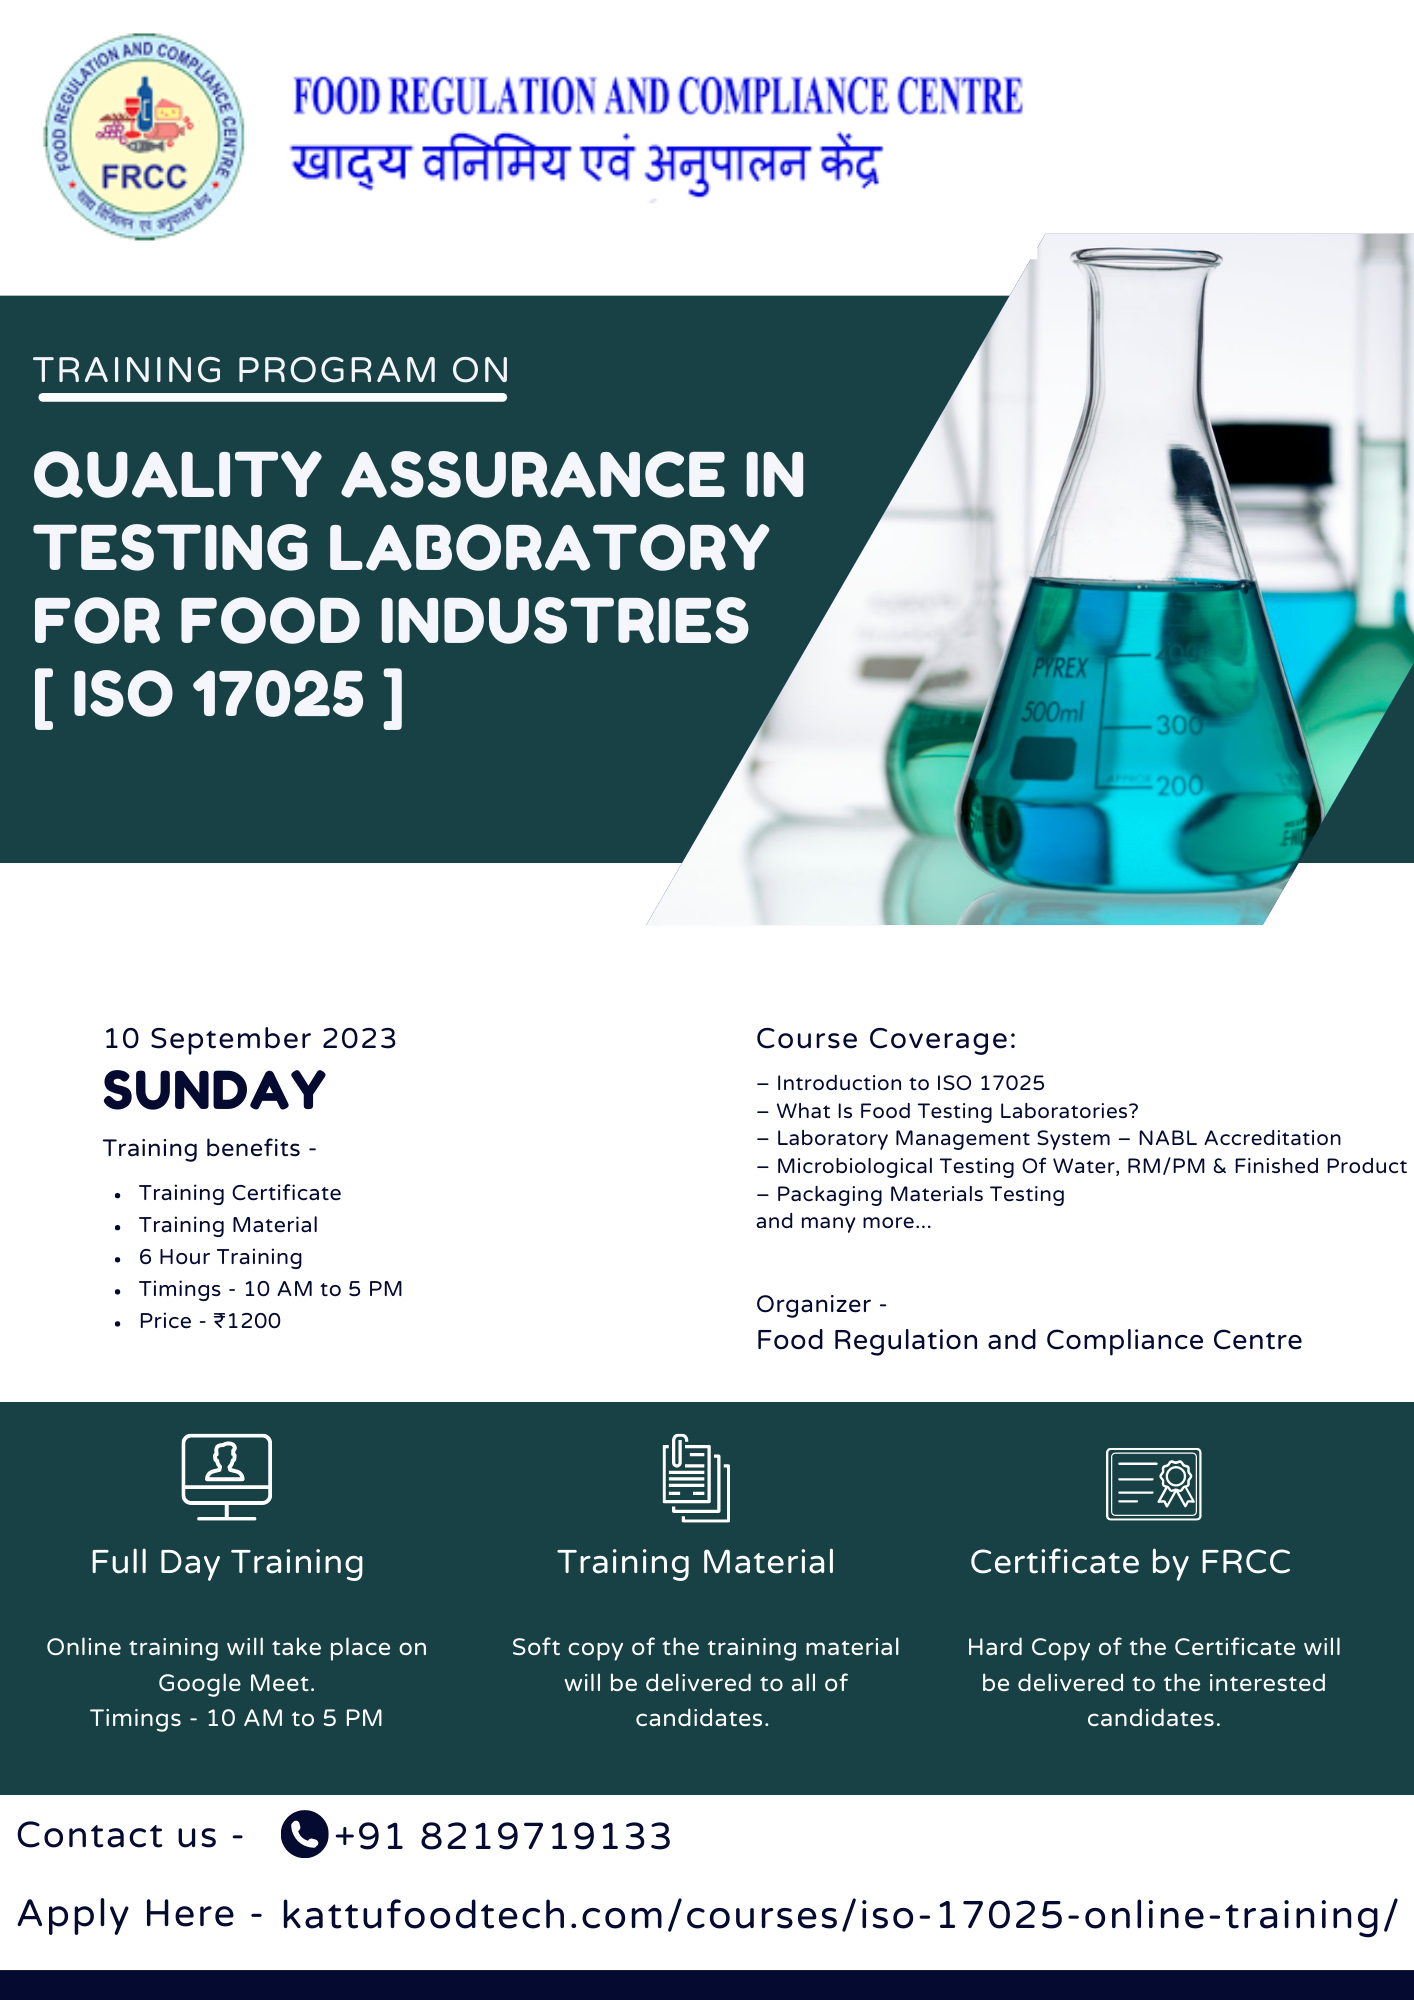 Quality Assurance in Testing Laboratory as per ISO17025 - FRCC Professional Courses - KATTUFOODTECH